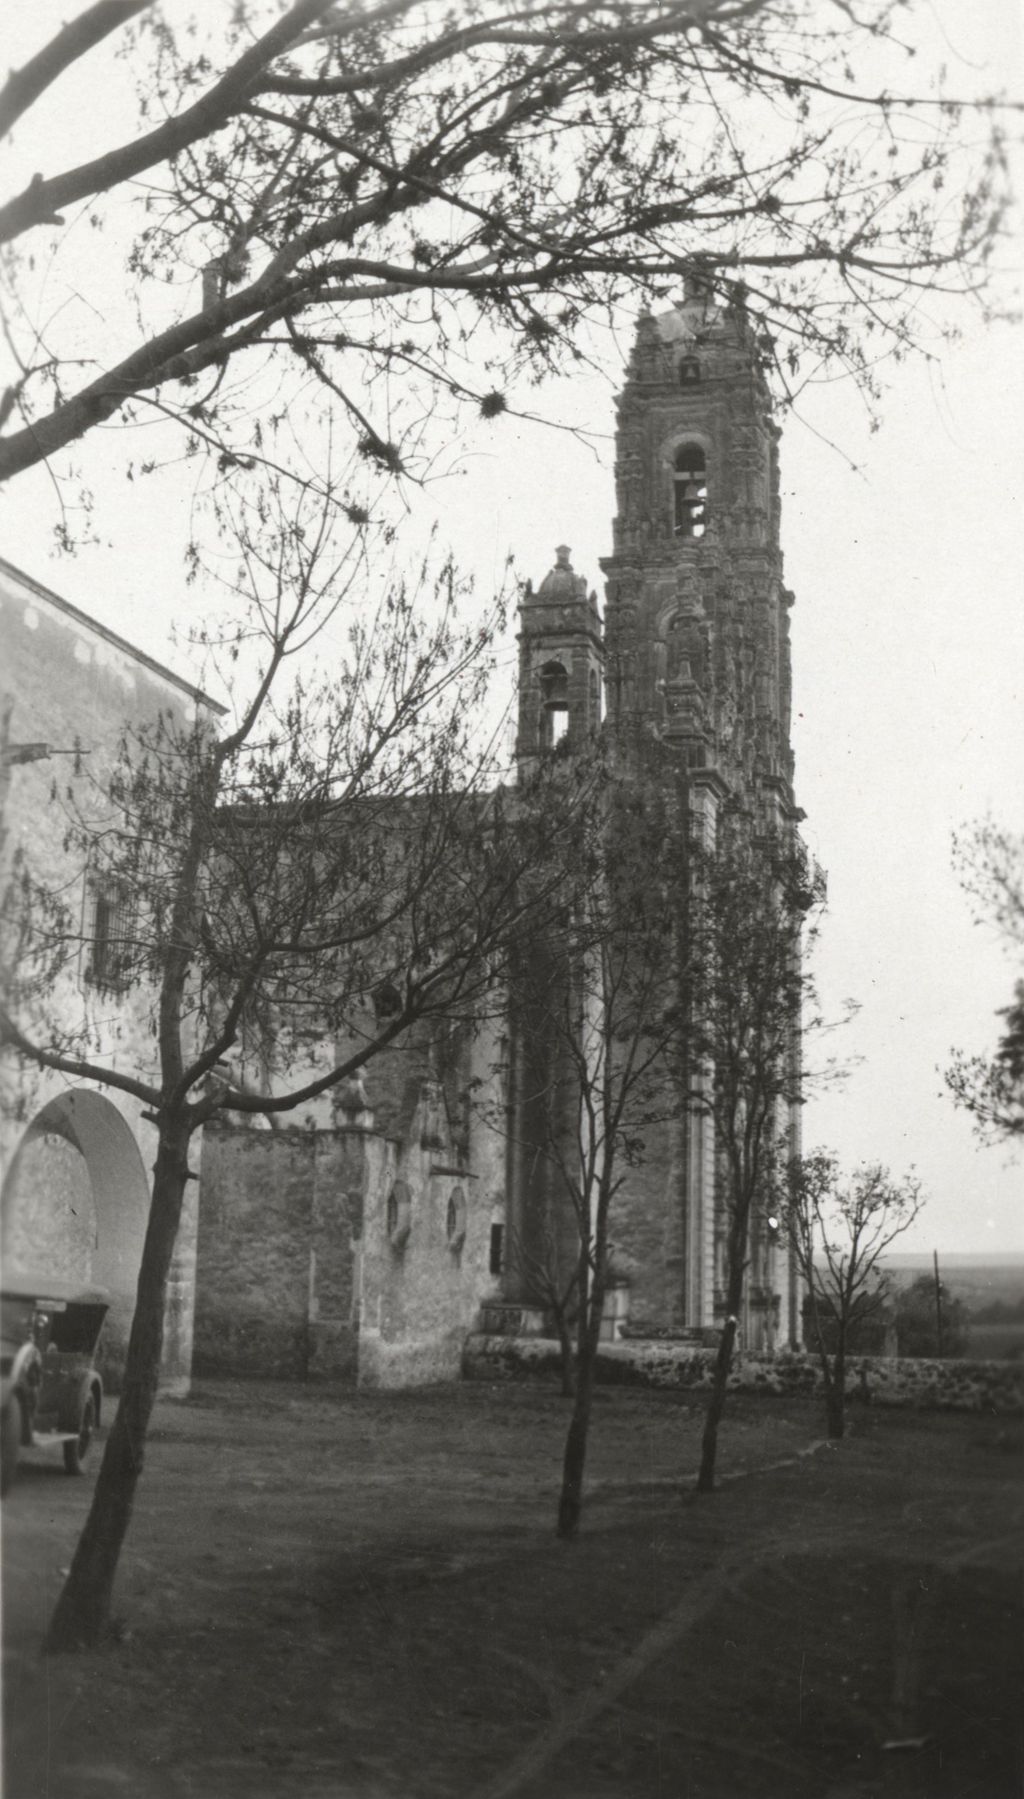 Miniature of Church photographed on Jane Addams' trip to Mexico